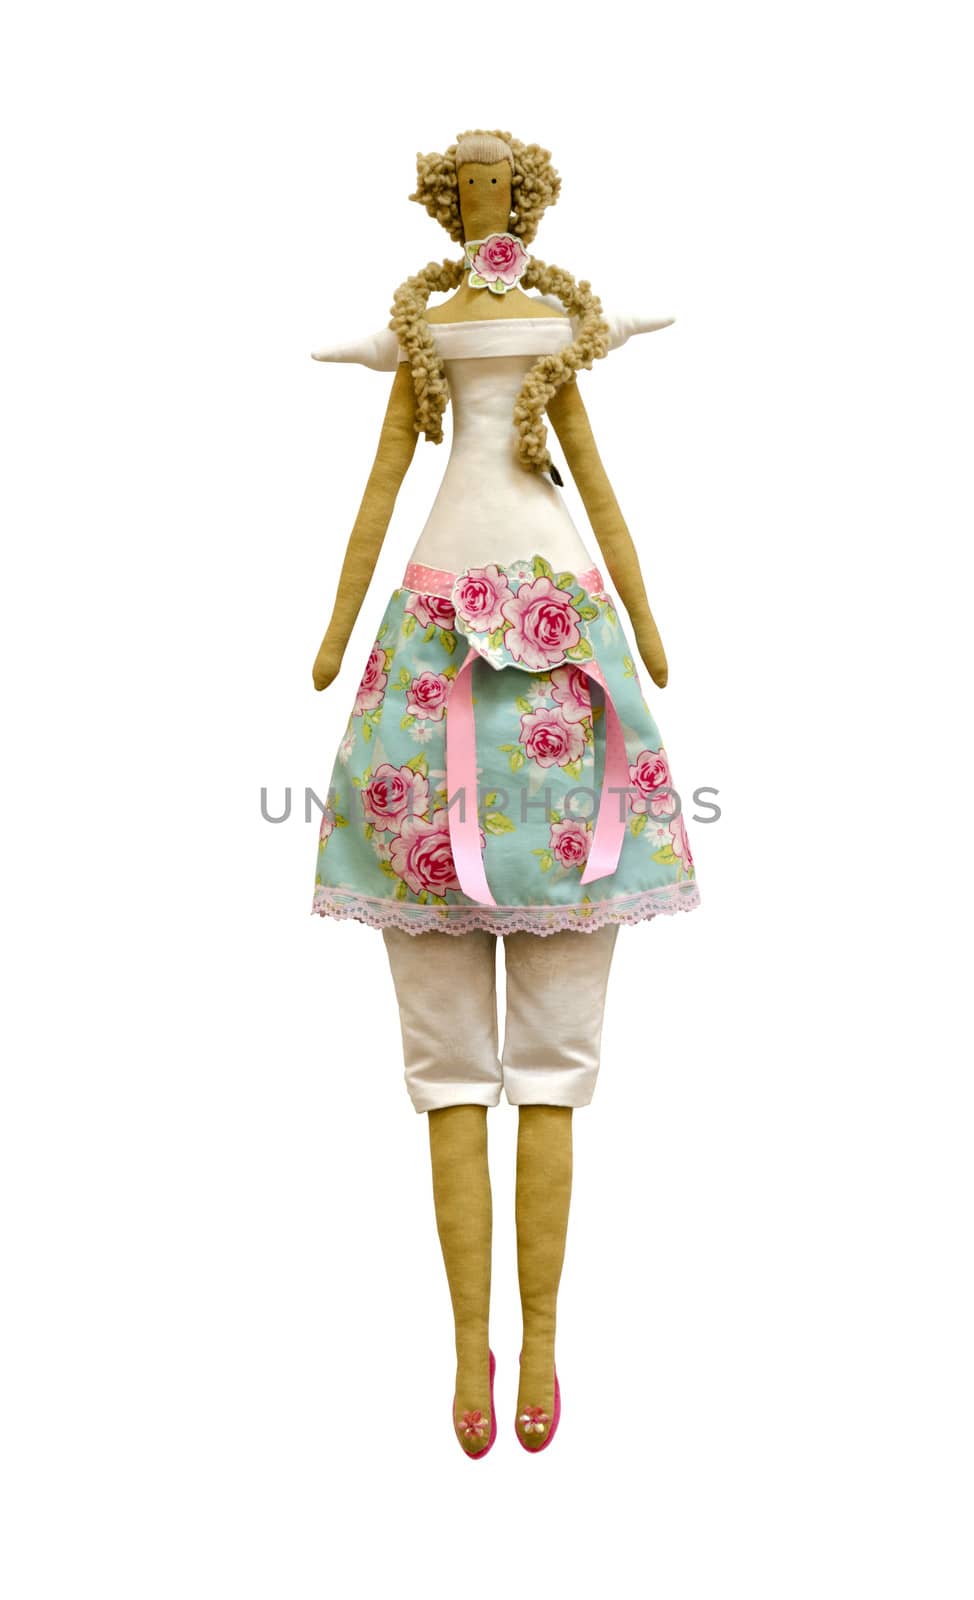 The Handmade isolated doll in dress and pants with wings and roses